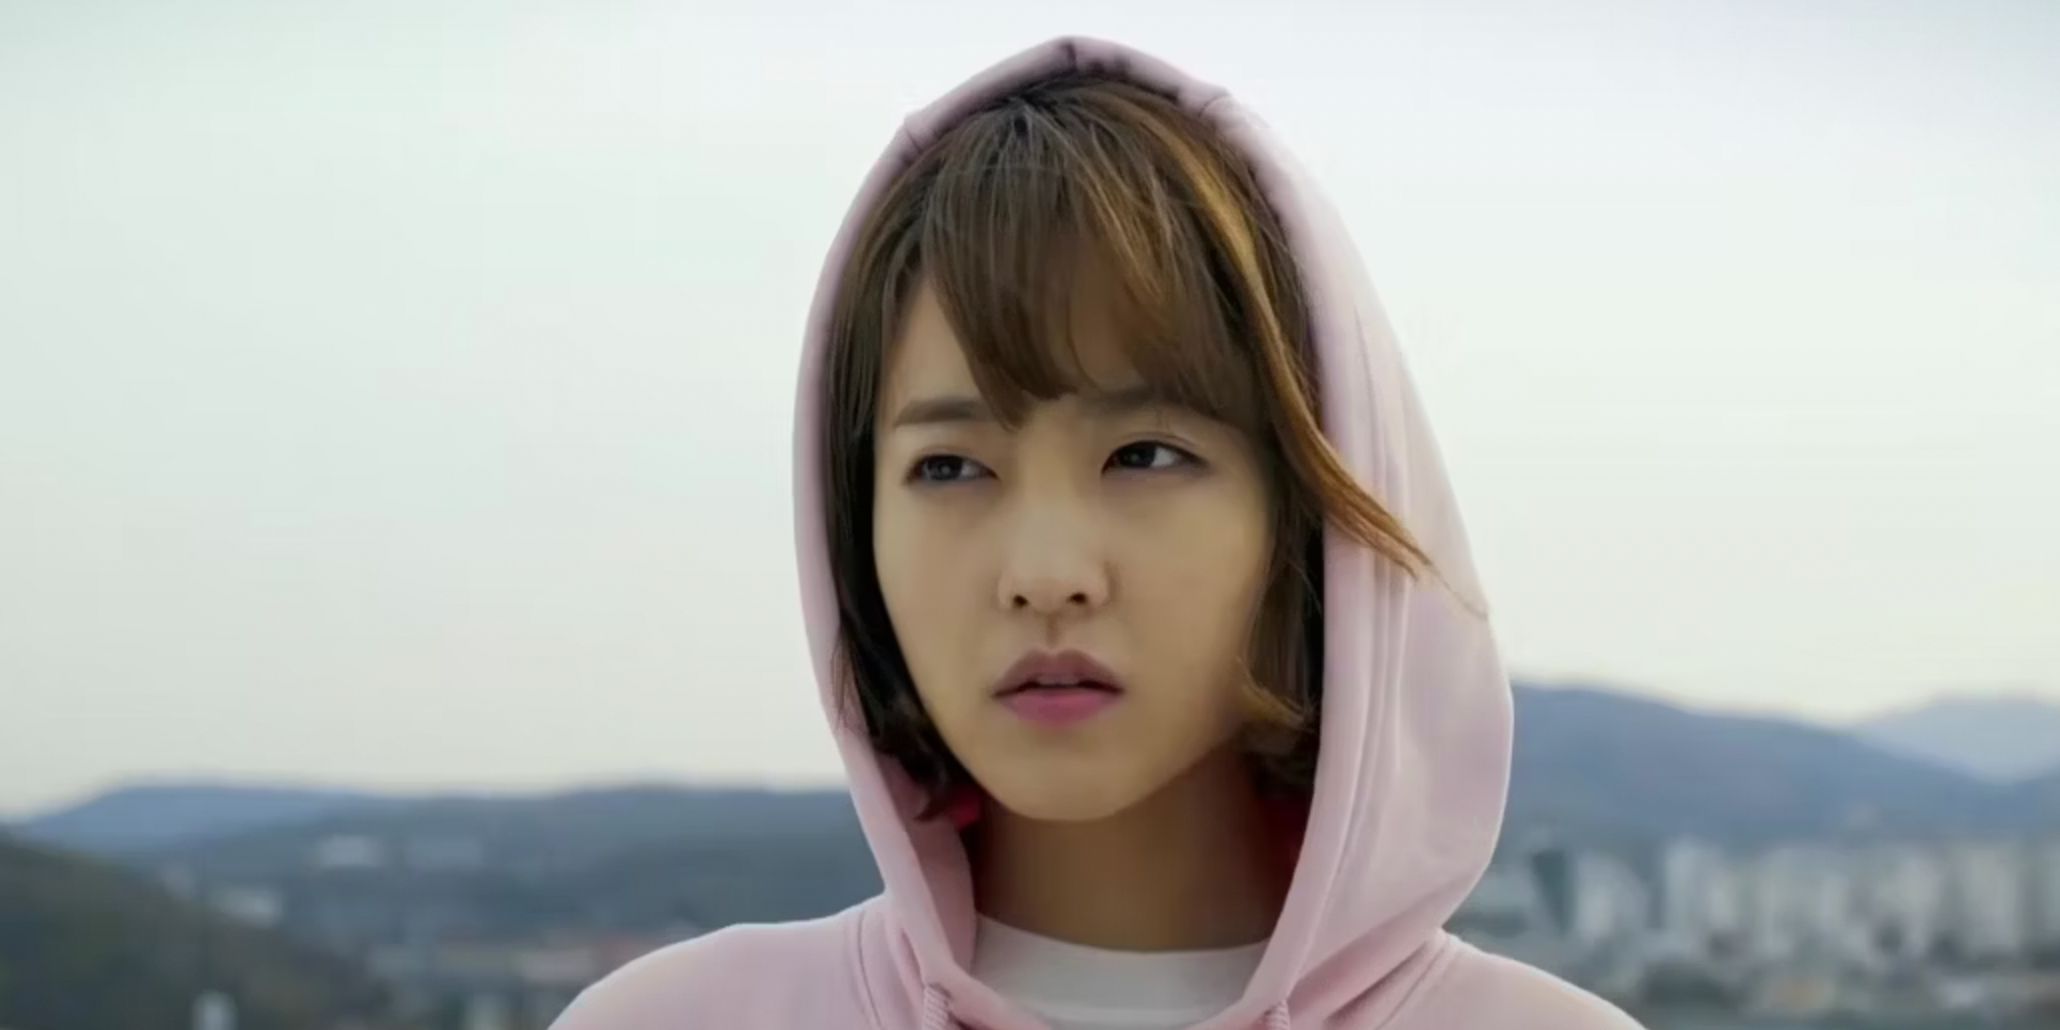 Strong Girl Bo Dong-Soon in her pink hooded sweatshirt